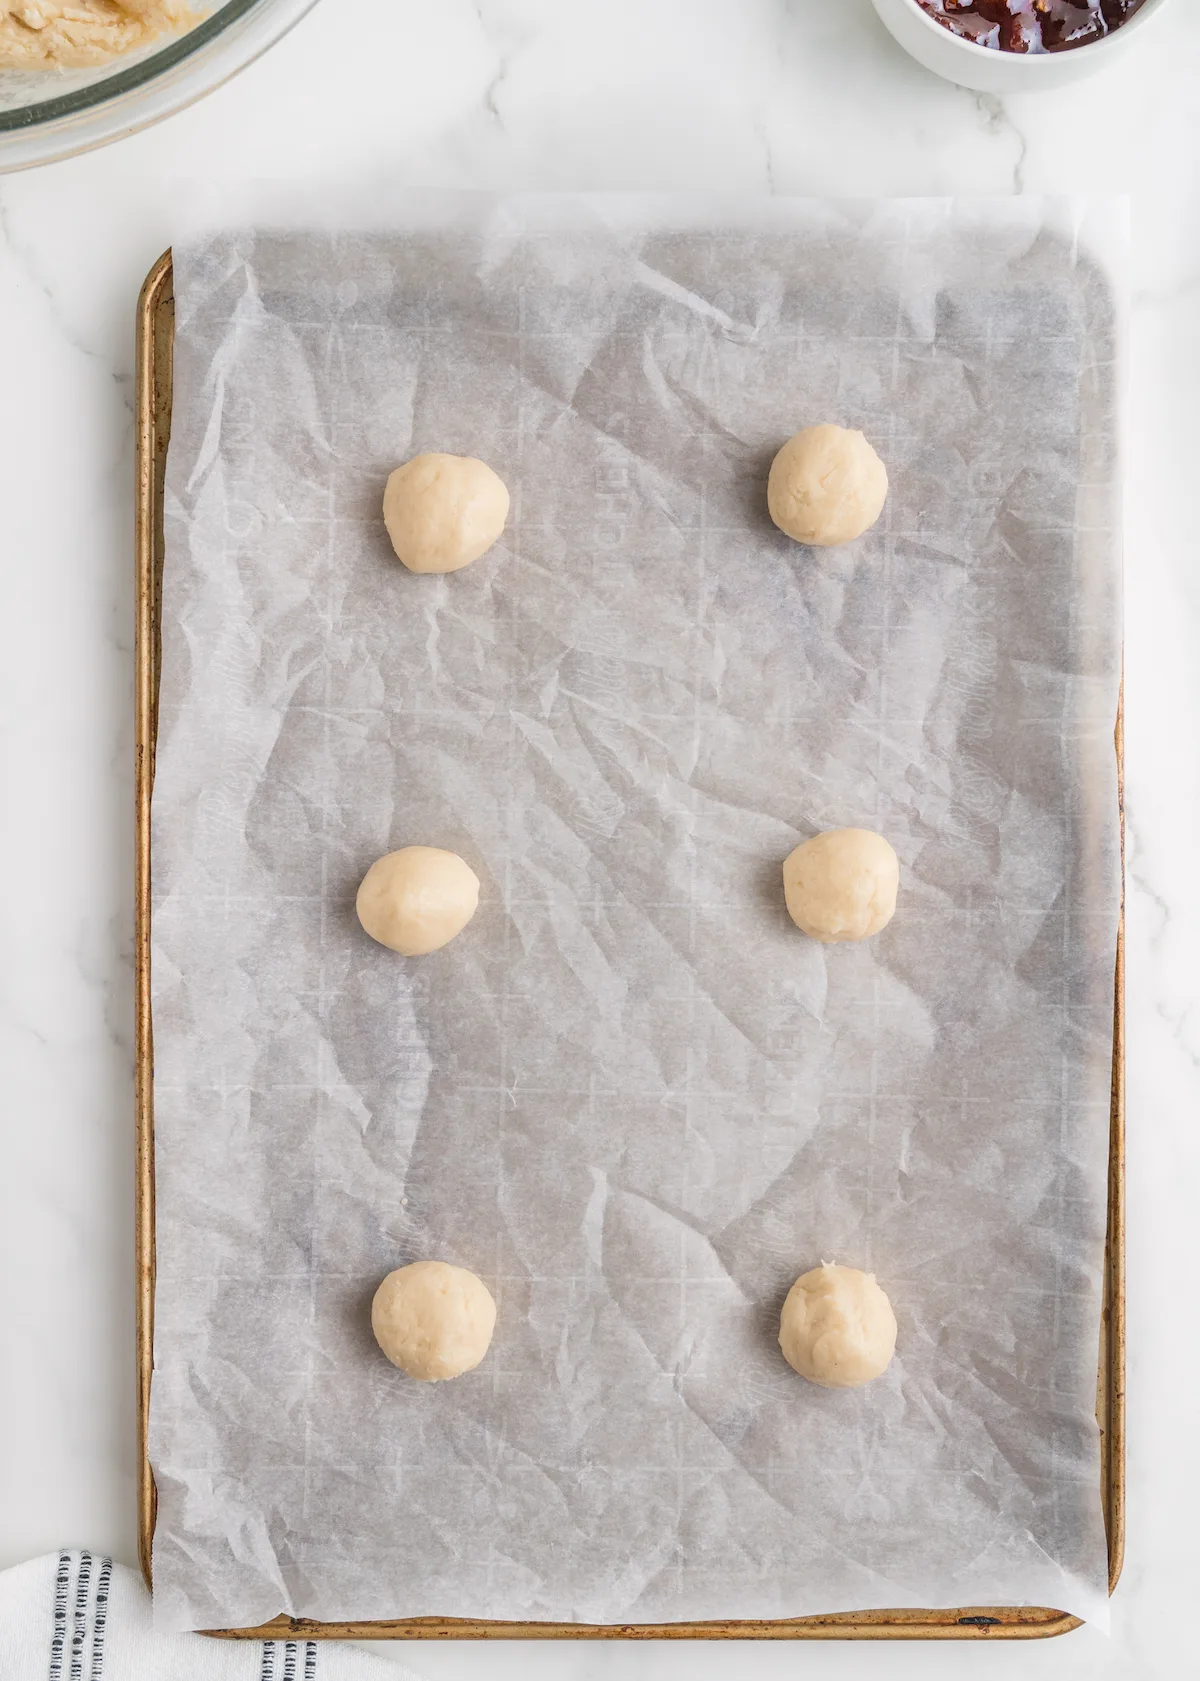 Dough placed on a baking sheet lined with parchment paper